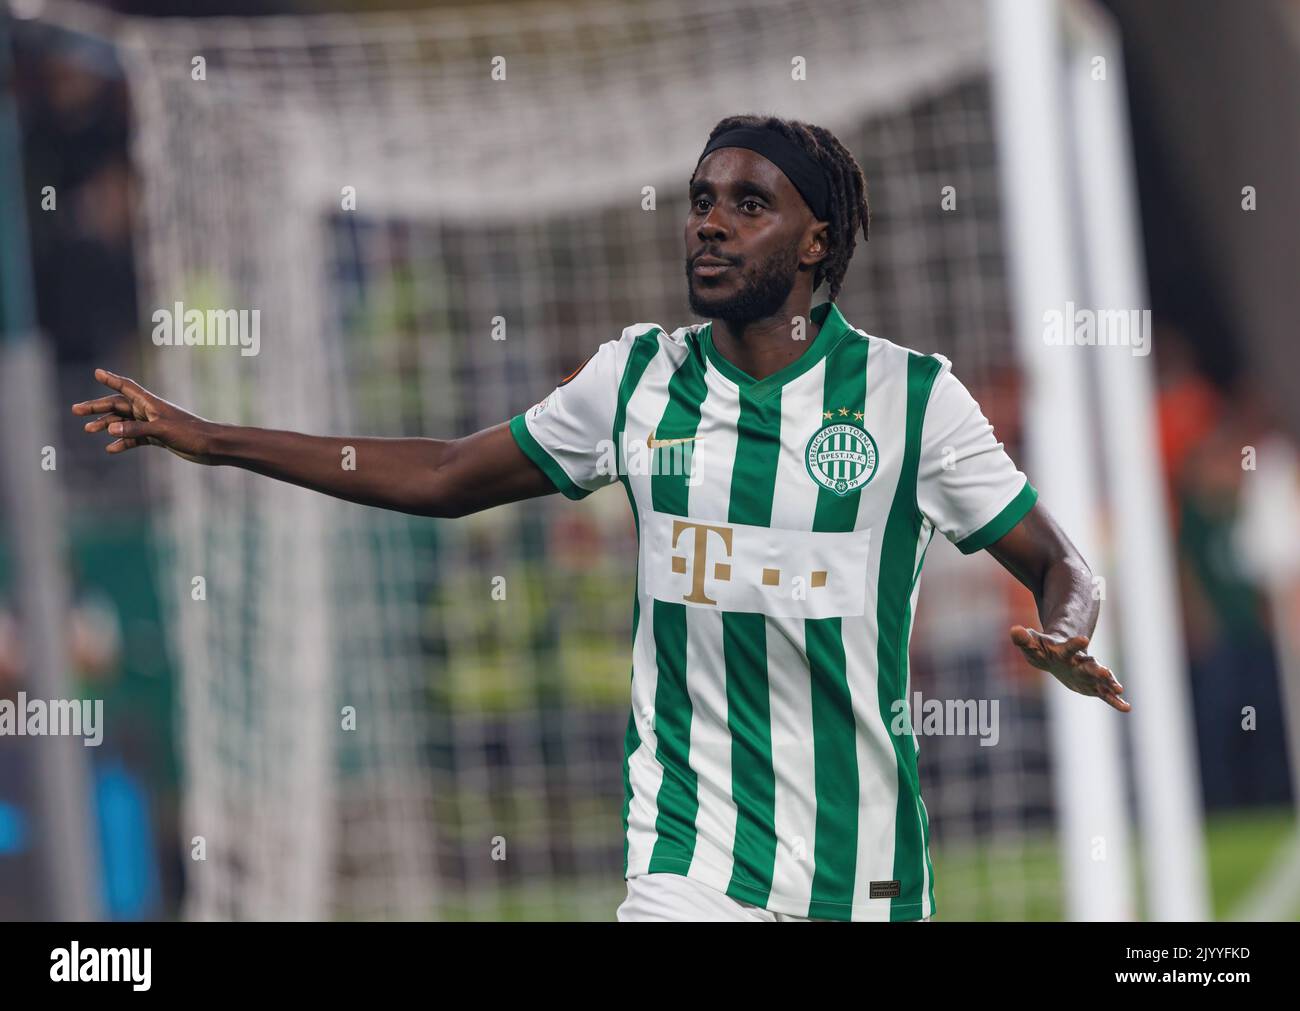 Amer Gojak of Ferencvarosi TC celebrates after scoring a goal with News  Photo - Getty Images